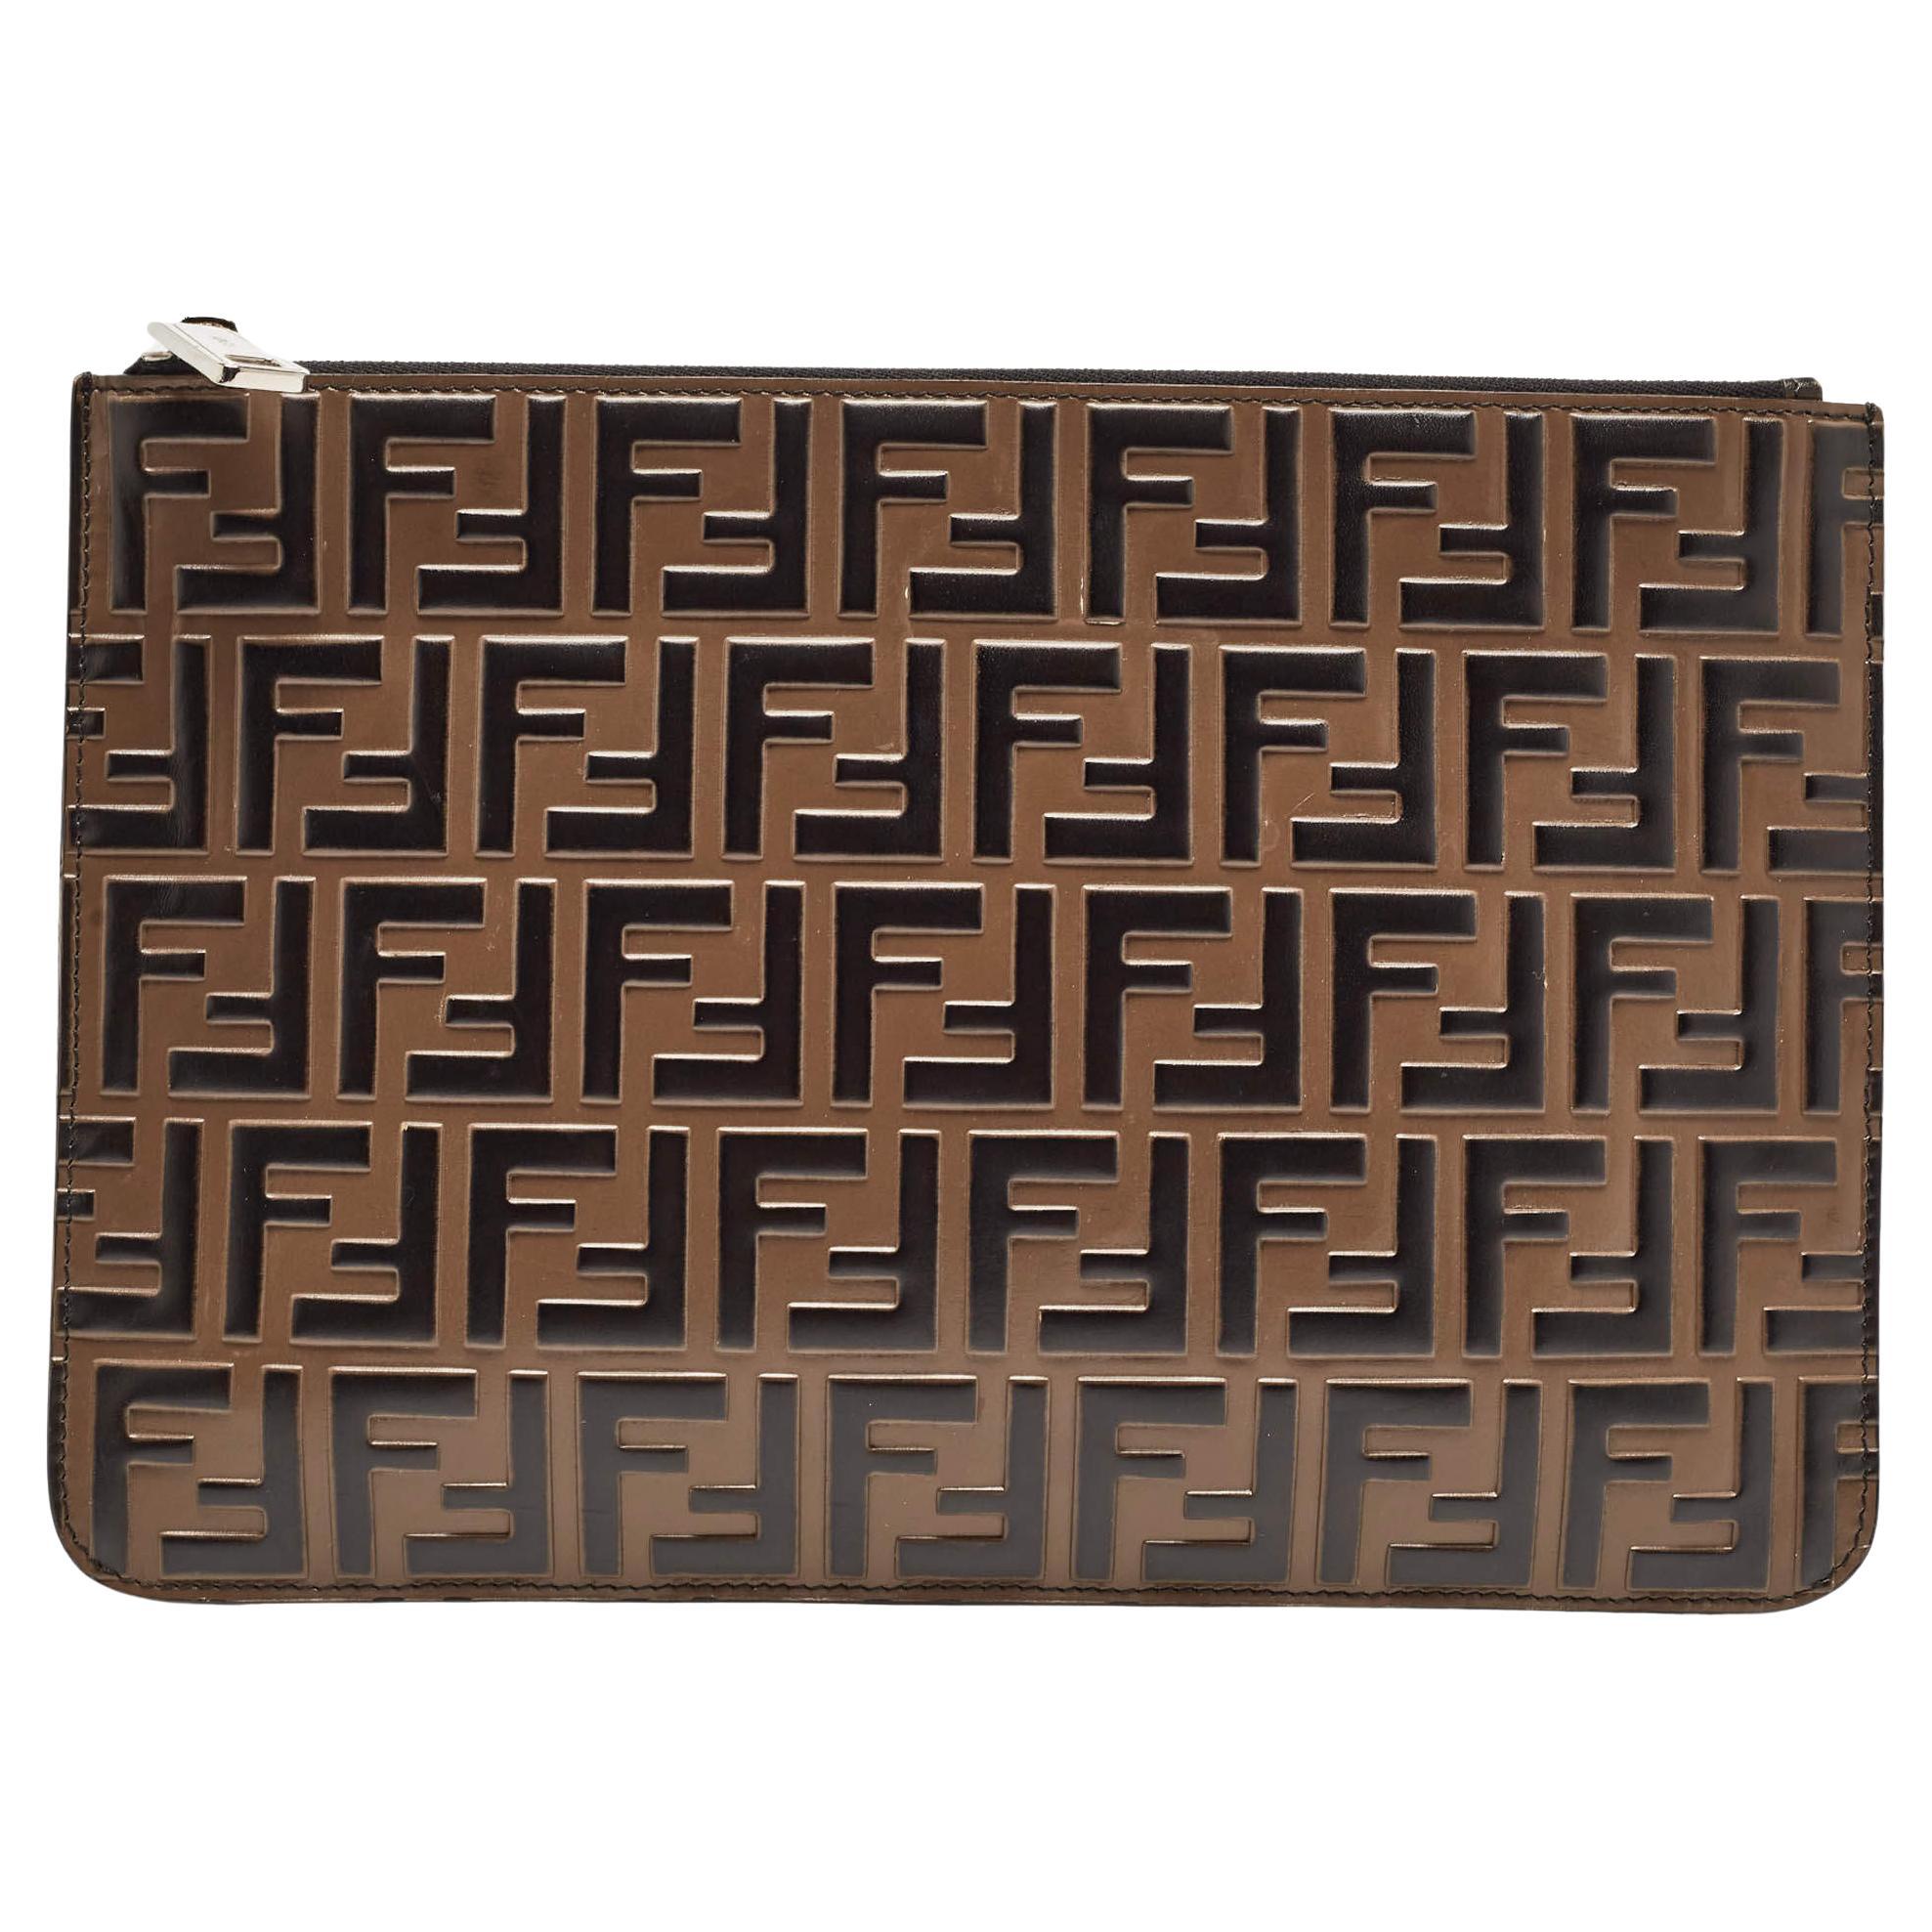 Fendi Tobacco/Black Zucca Embossed Leather Zip Pouch